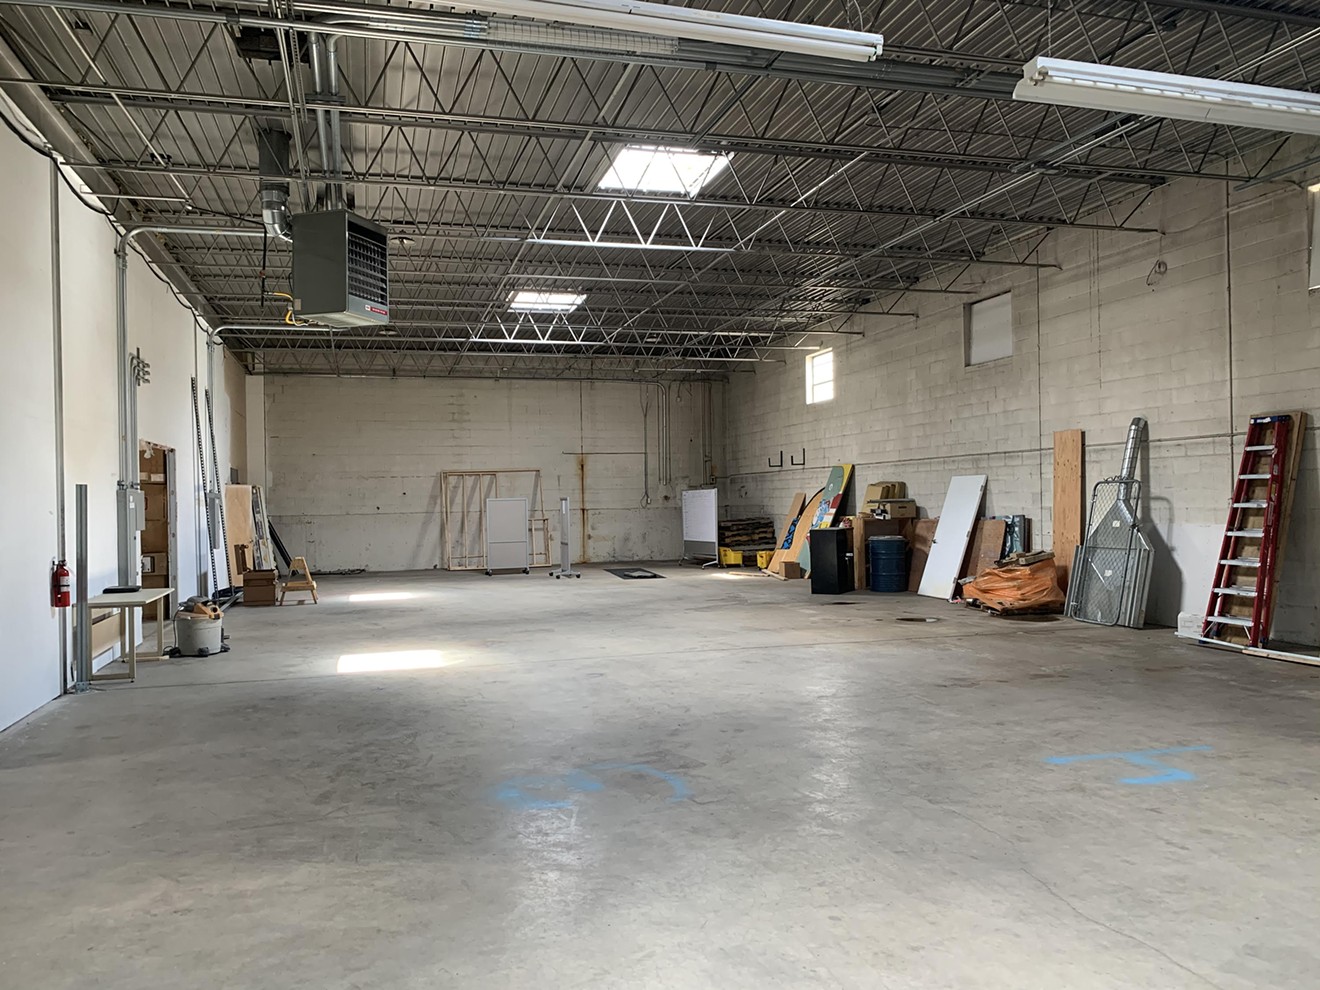 RiNo Art District is launching the No Vacancy artist residency program in a 10,000-square-foot warehouse.